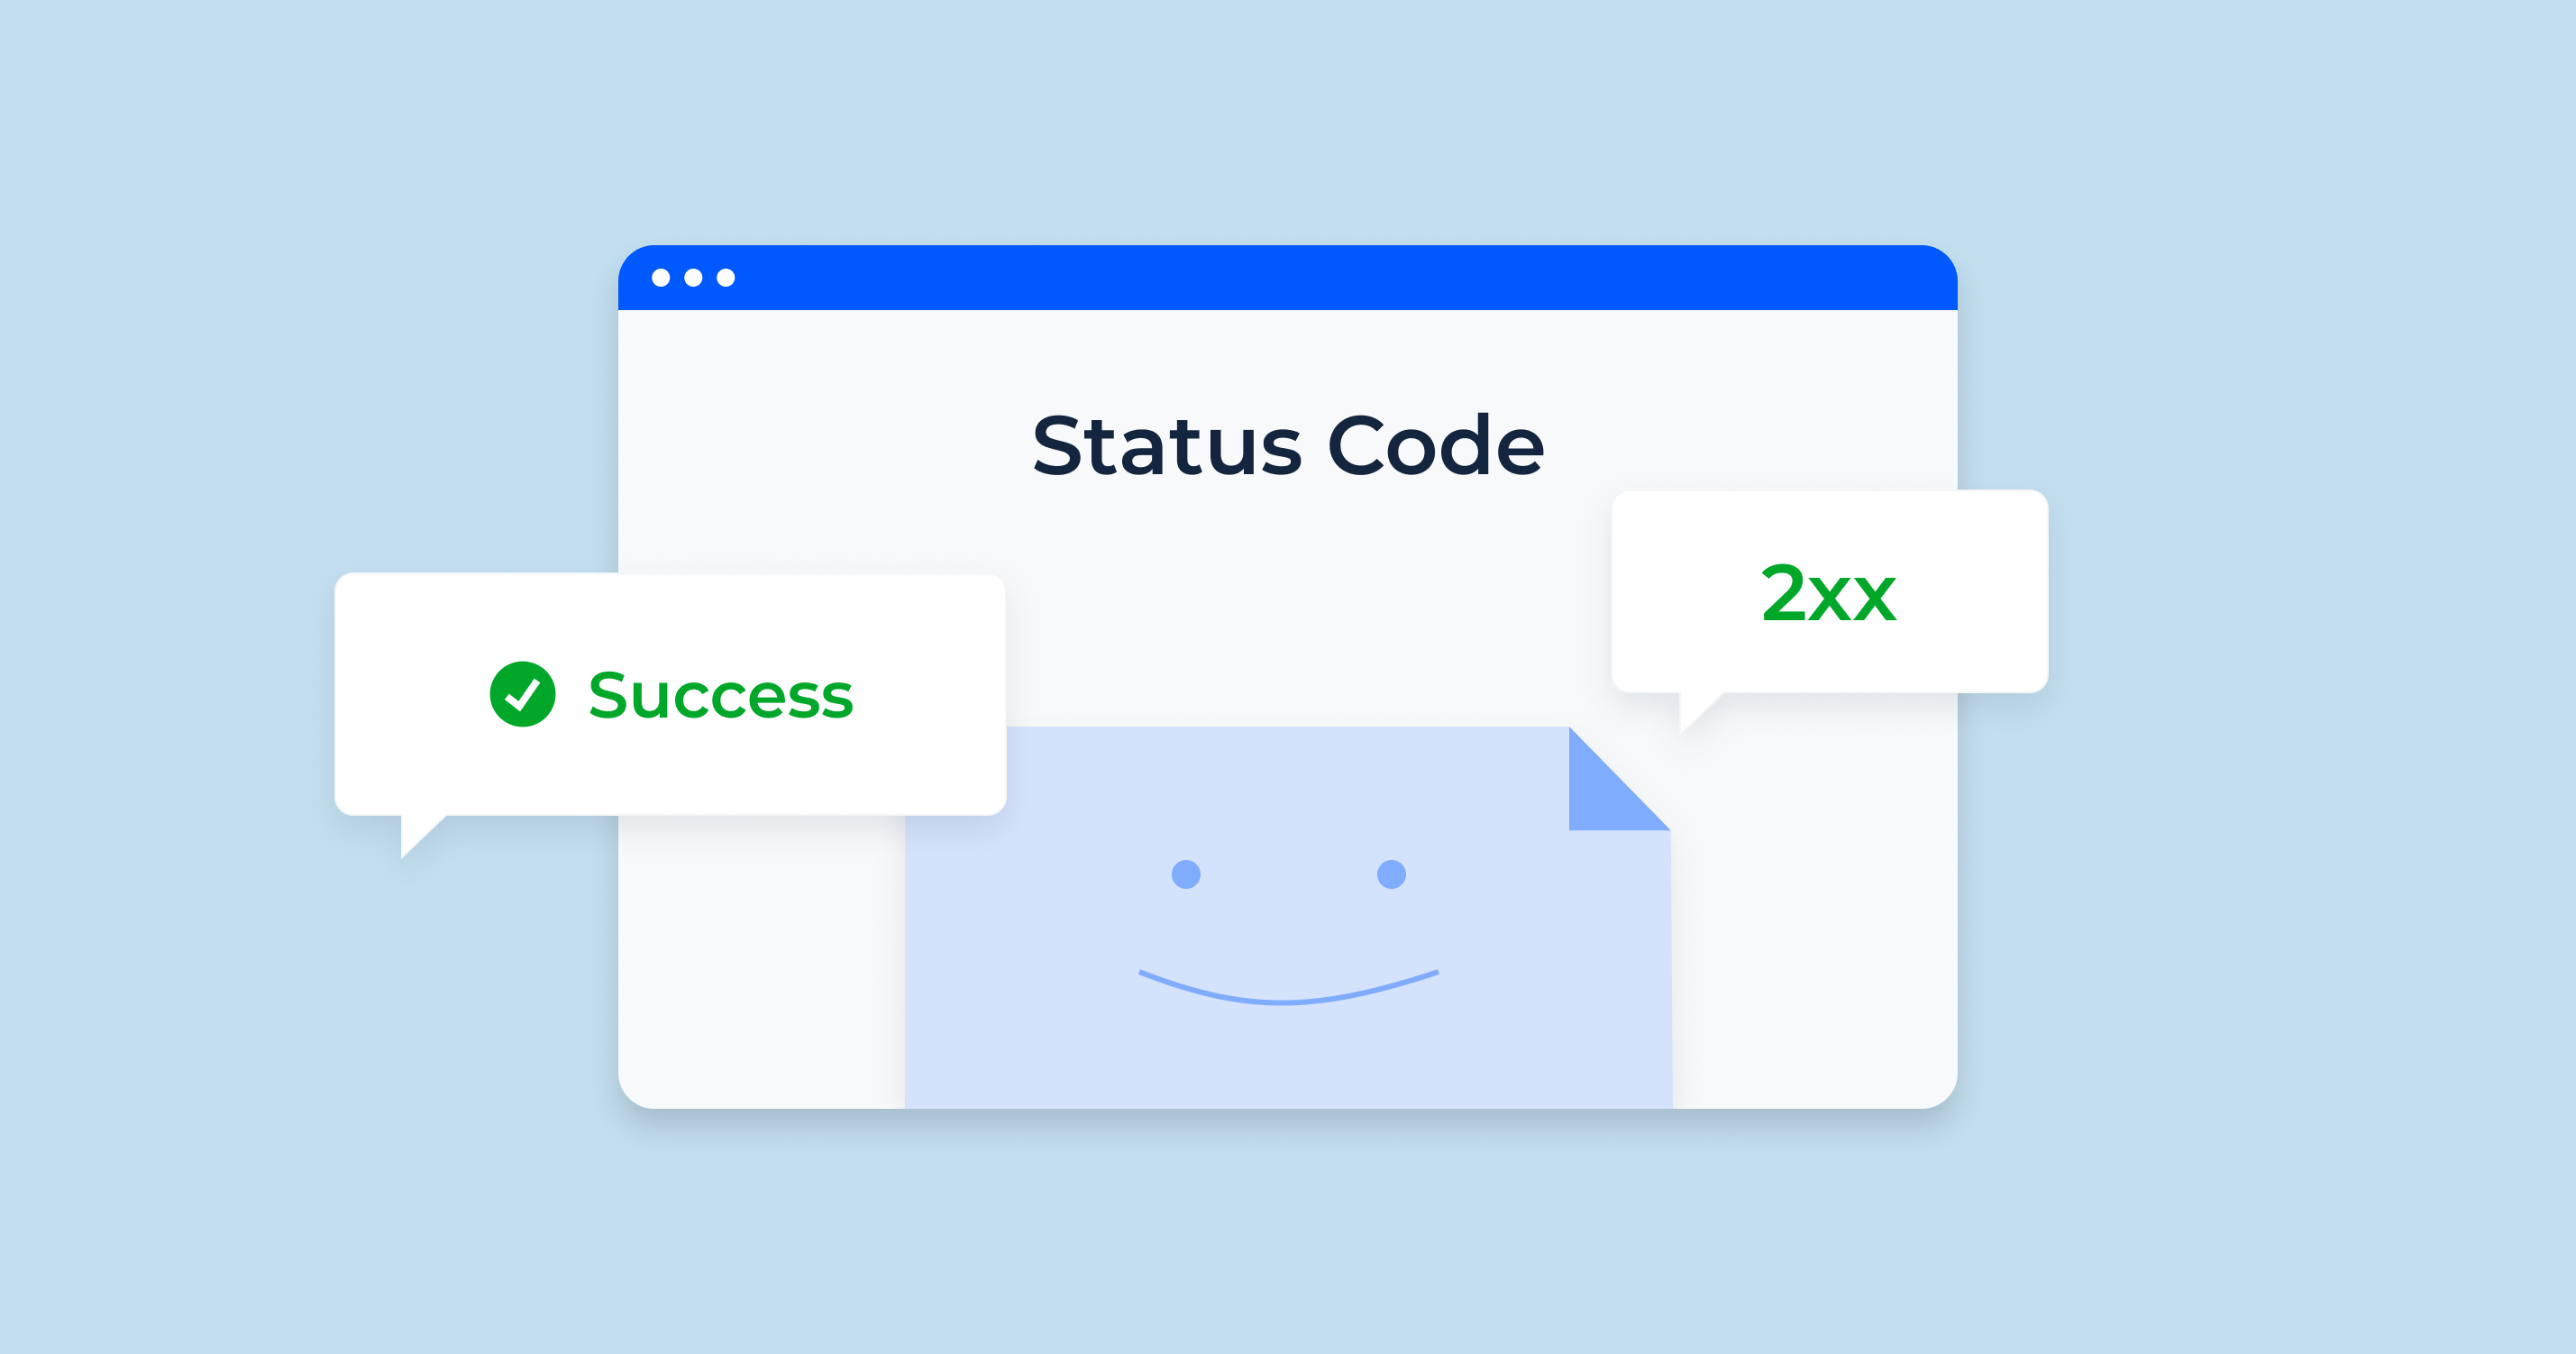 What are 2xx Status Codes: 200, 201, 202, 203, 204, 205, 206, 207, 208, 226, 226